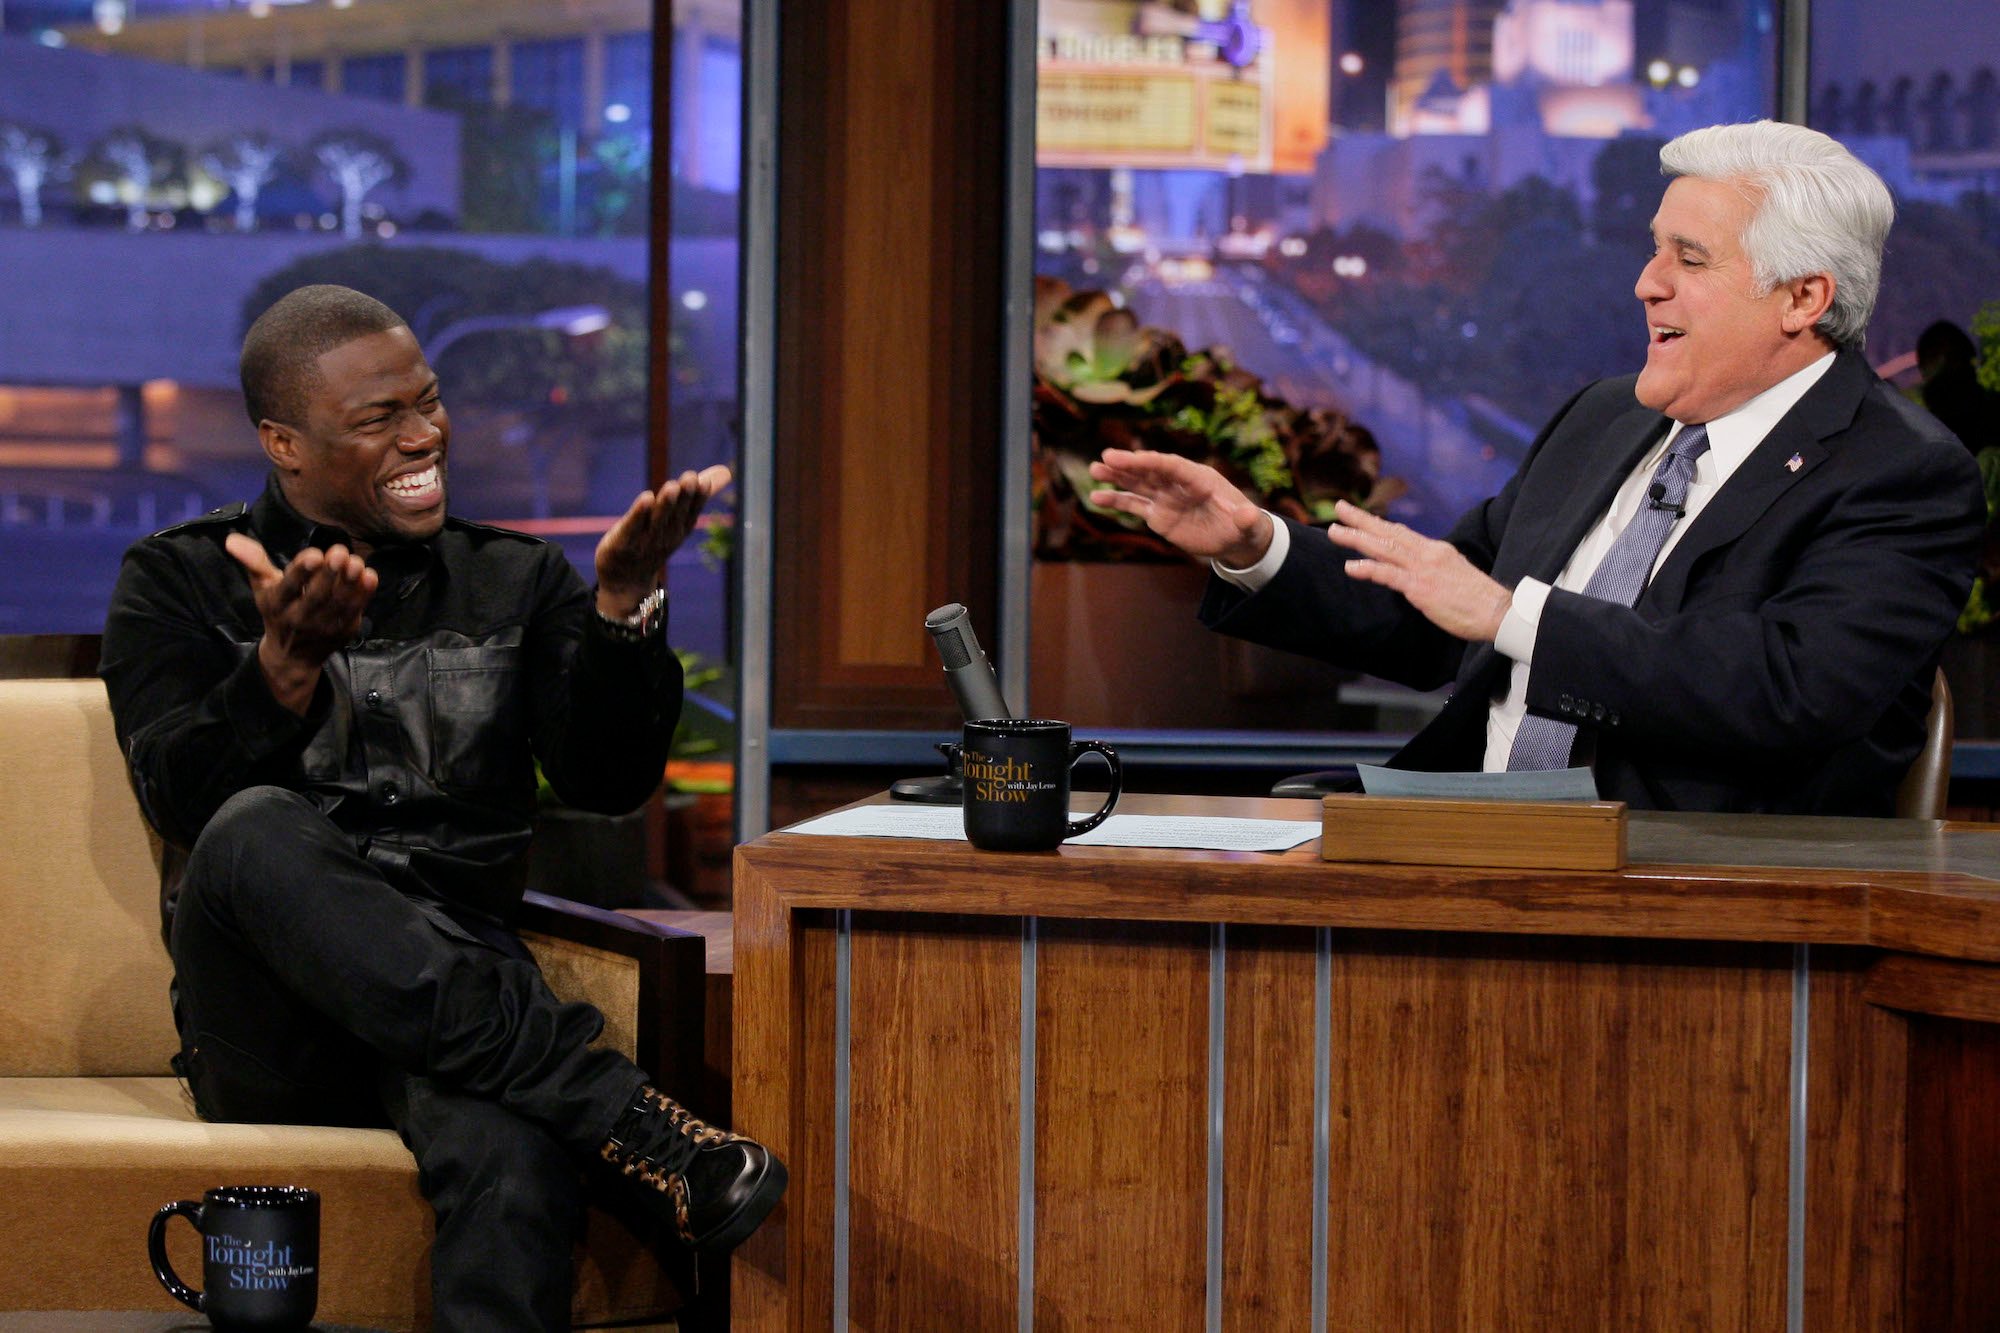 Kevin Hart and Jay Leno laughing, both with their hands raise